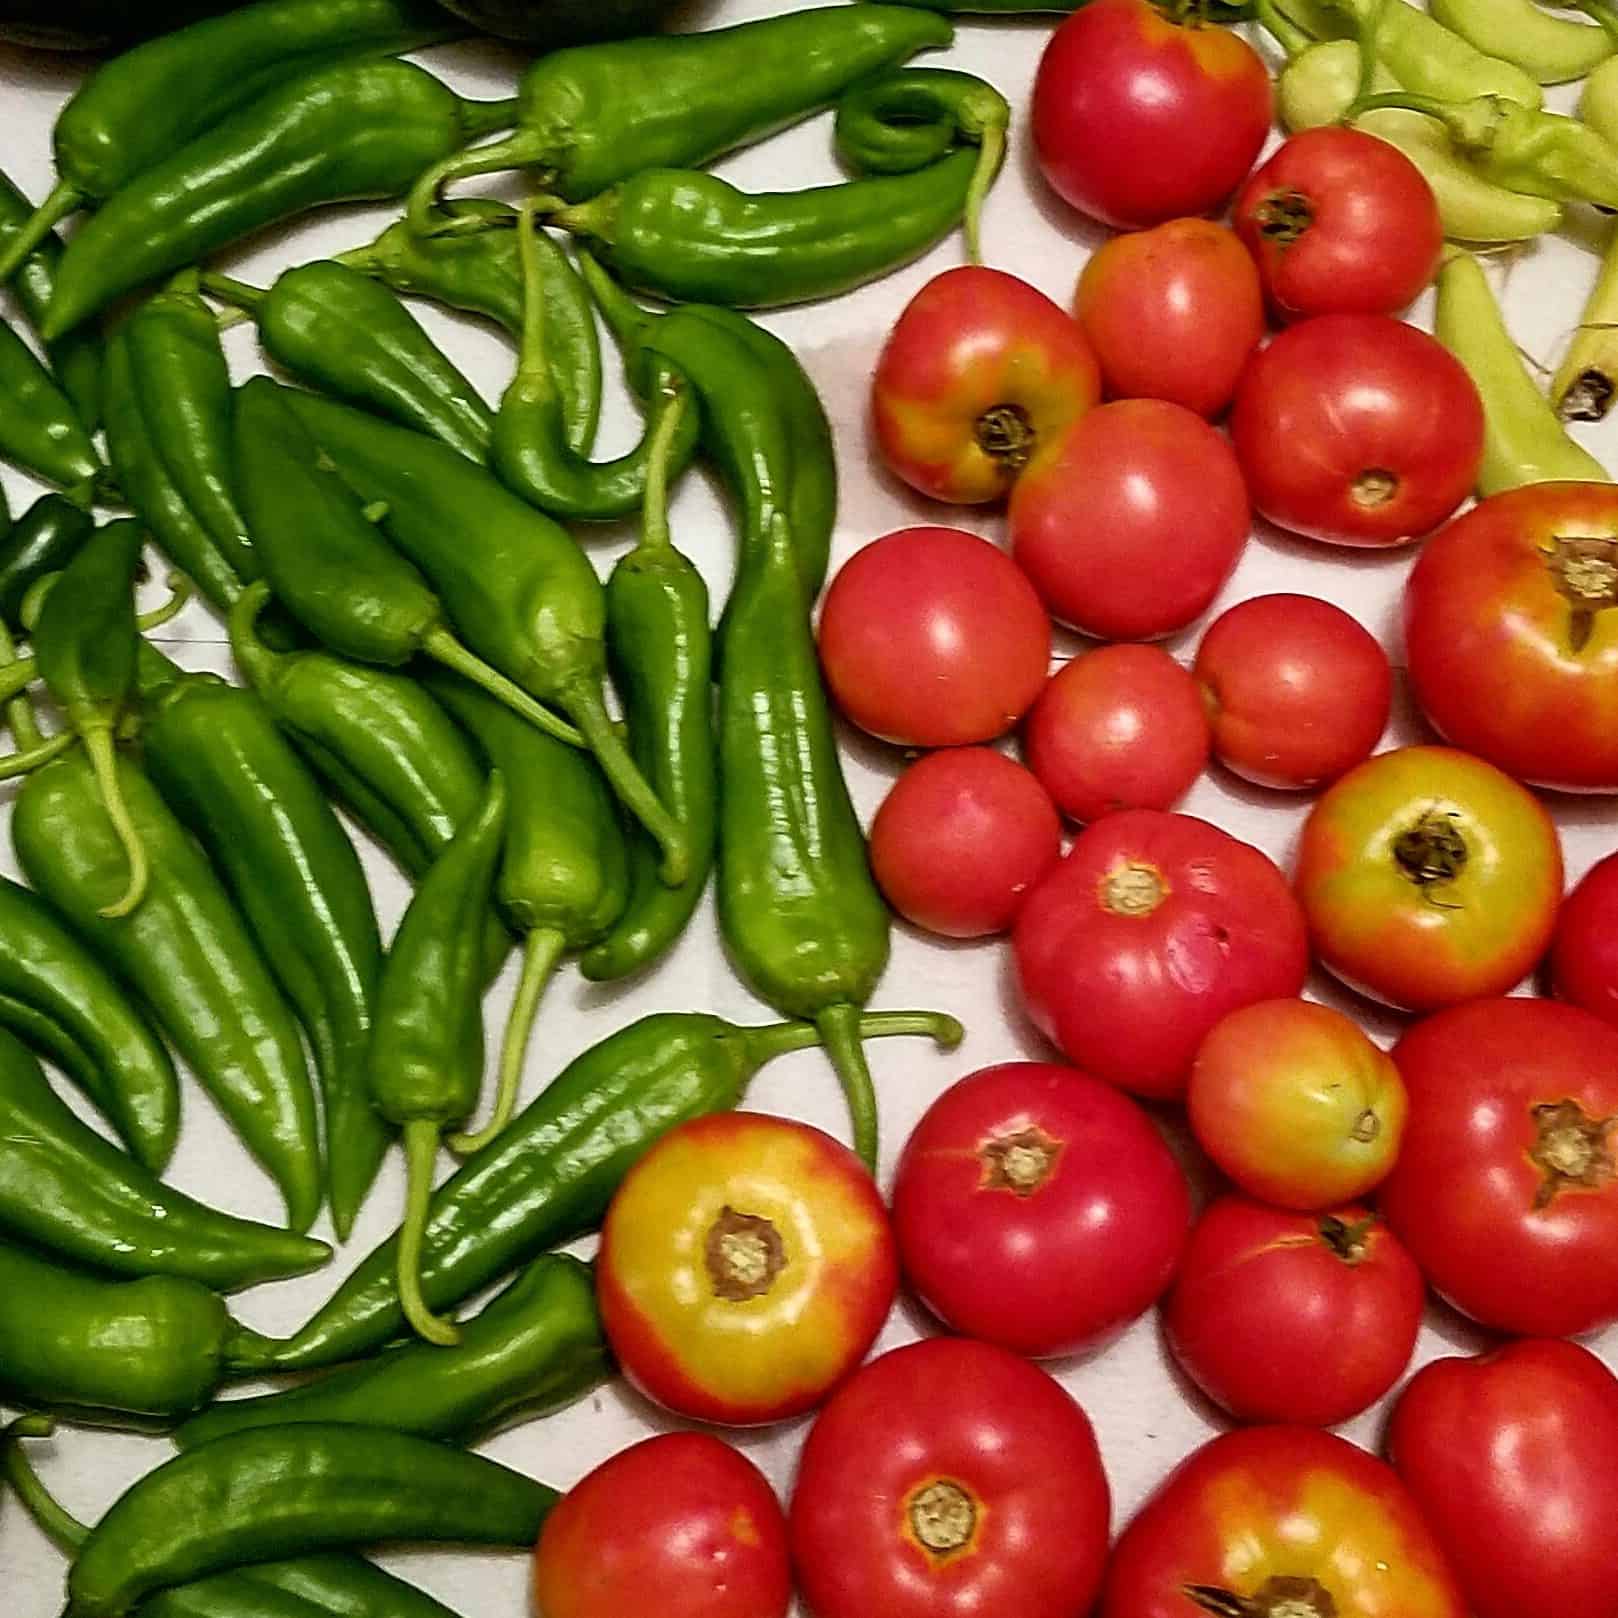 featured image for 'what vegetables are actually fruits'. tomatoes and peppers